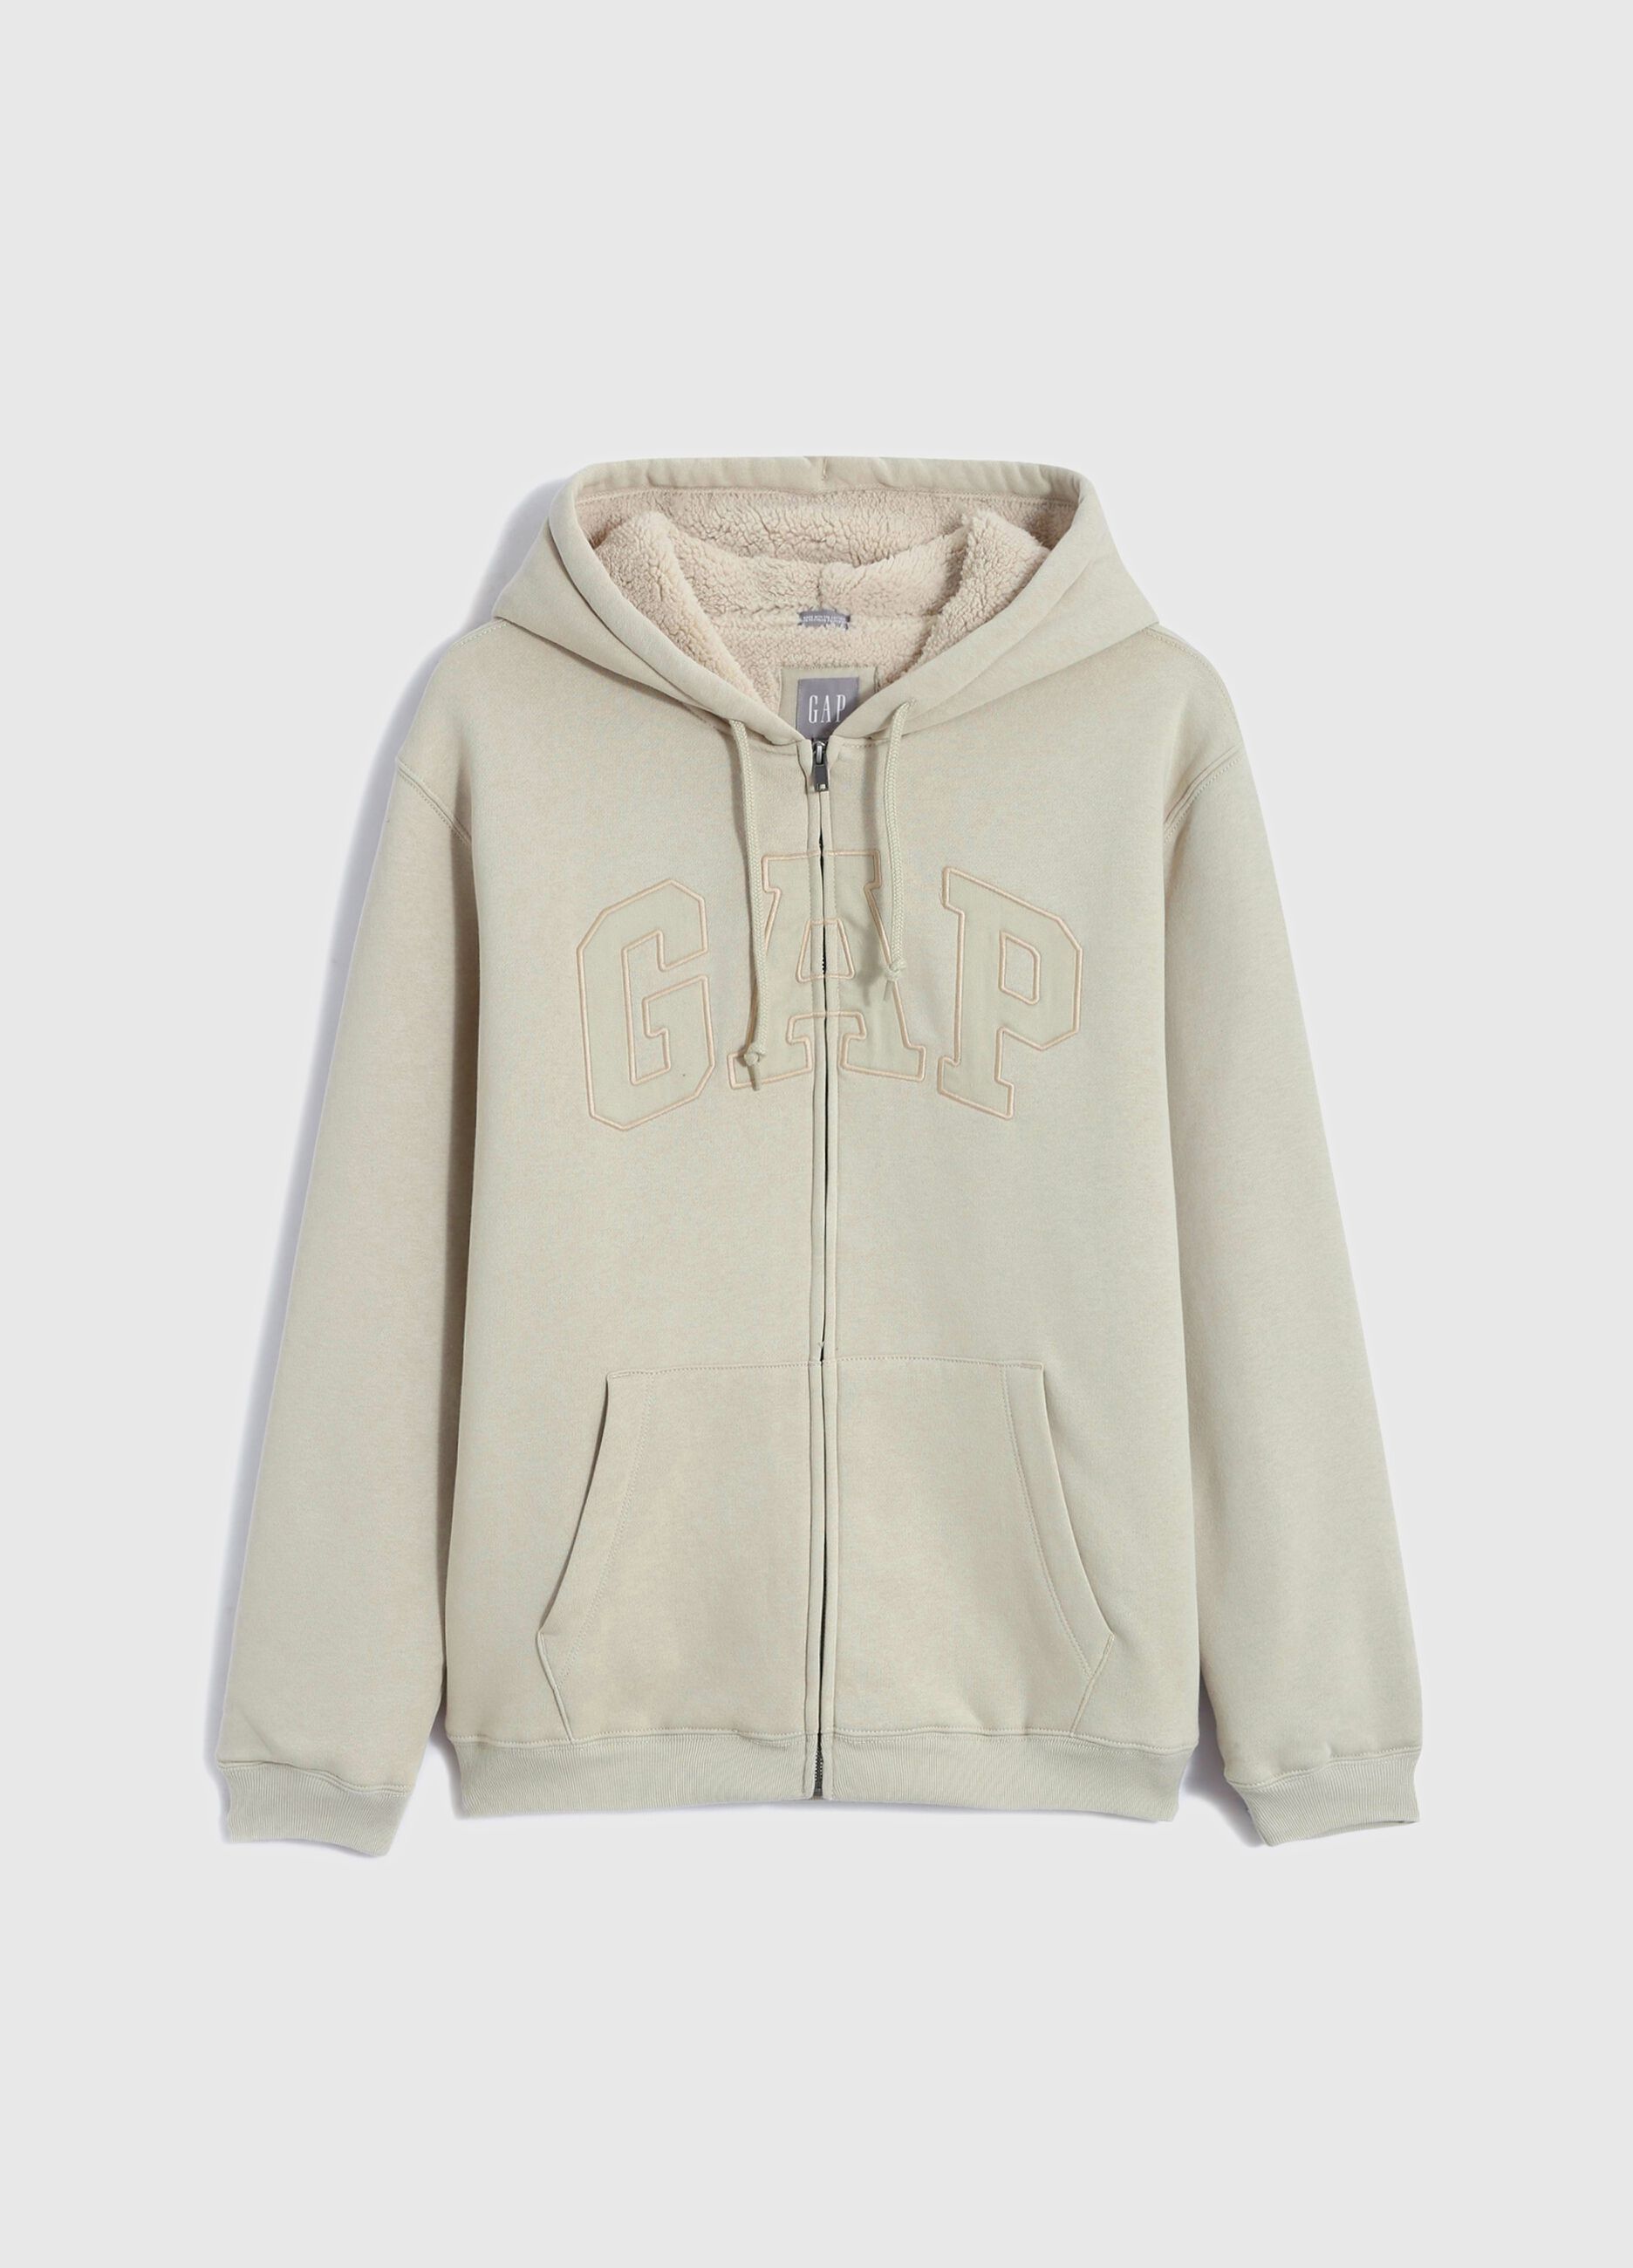 Full-zip hoodie with sherpa lining and logo embroidery